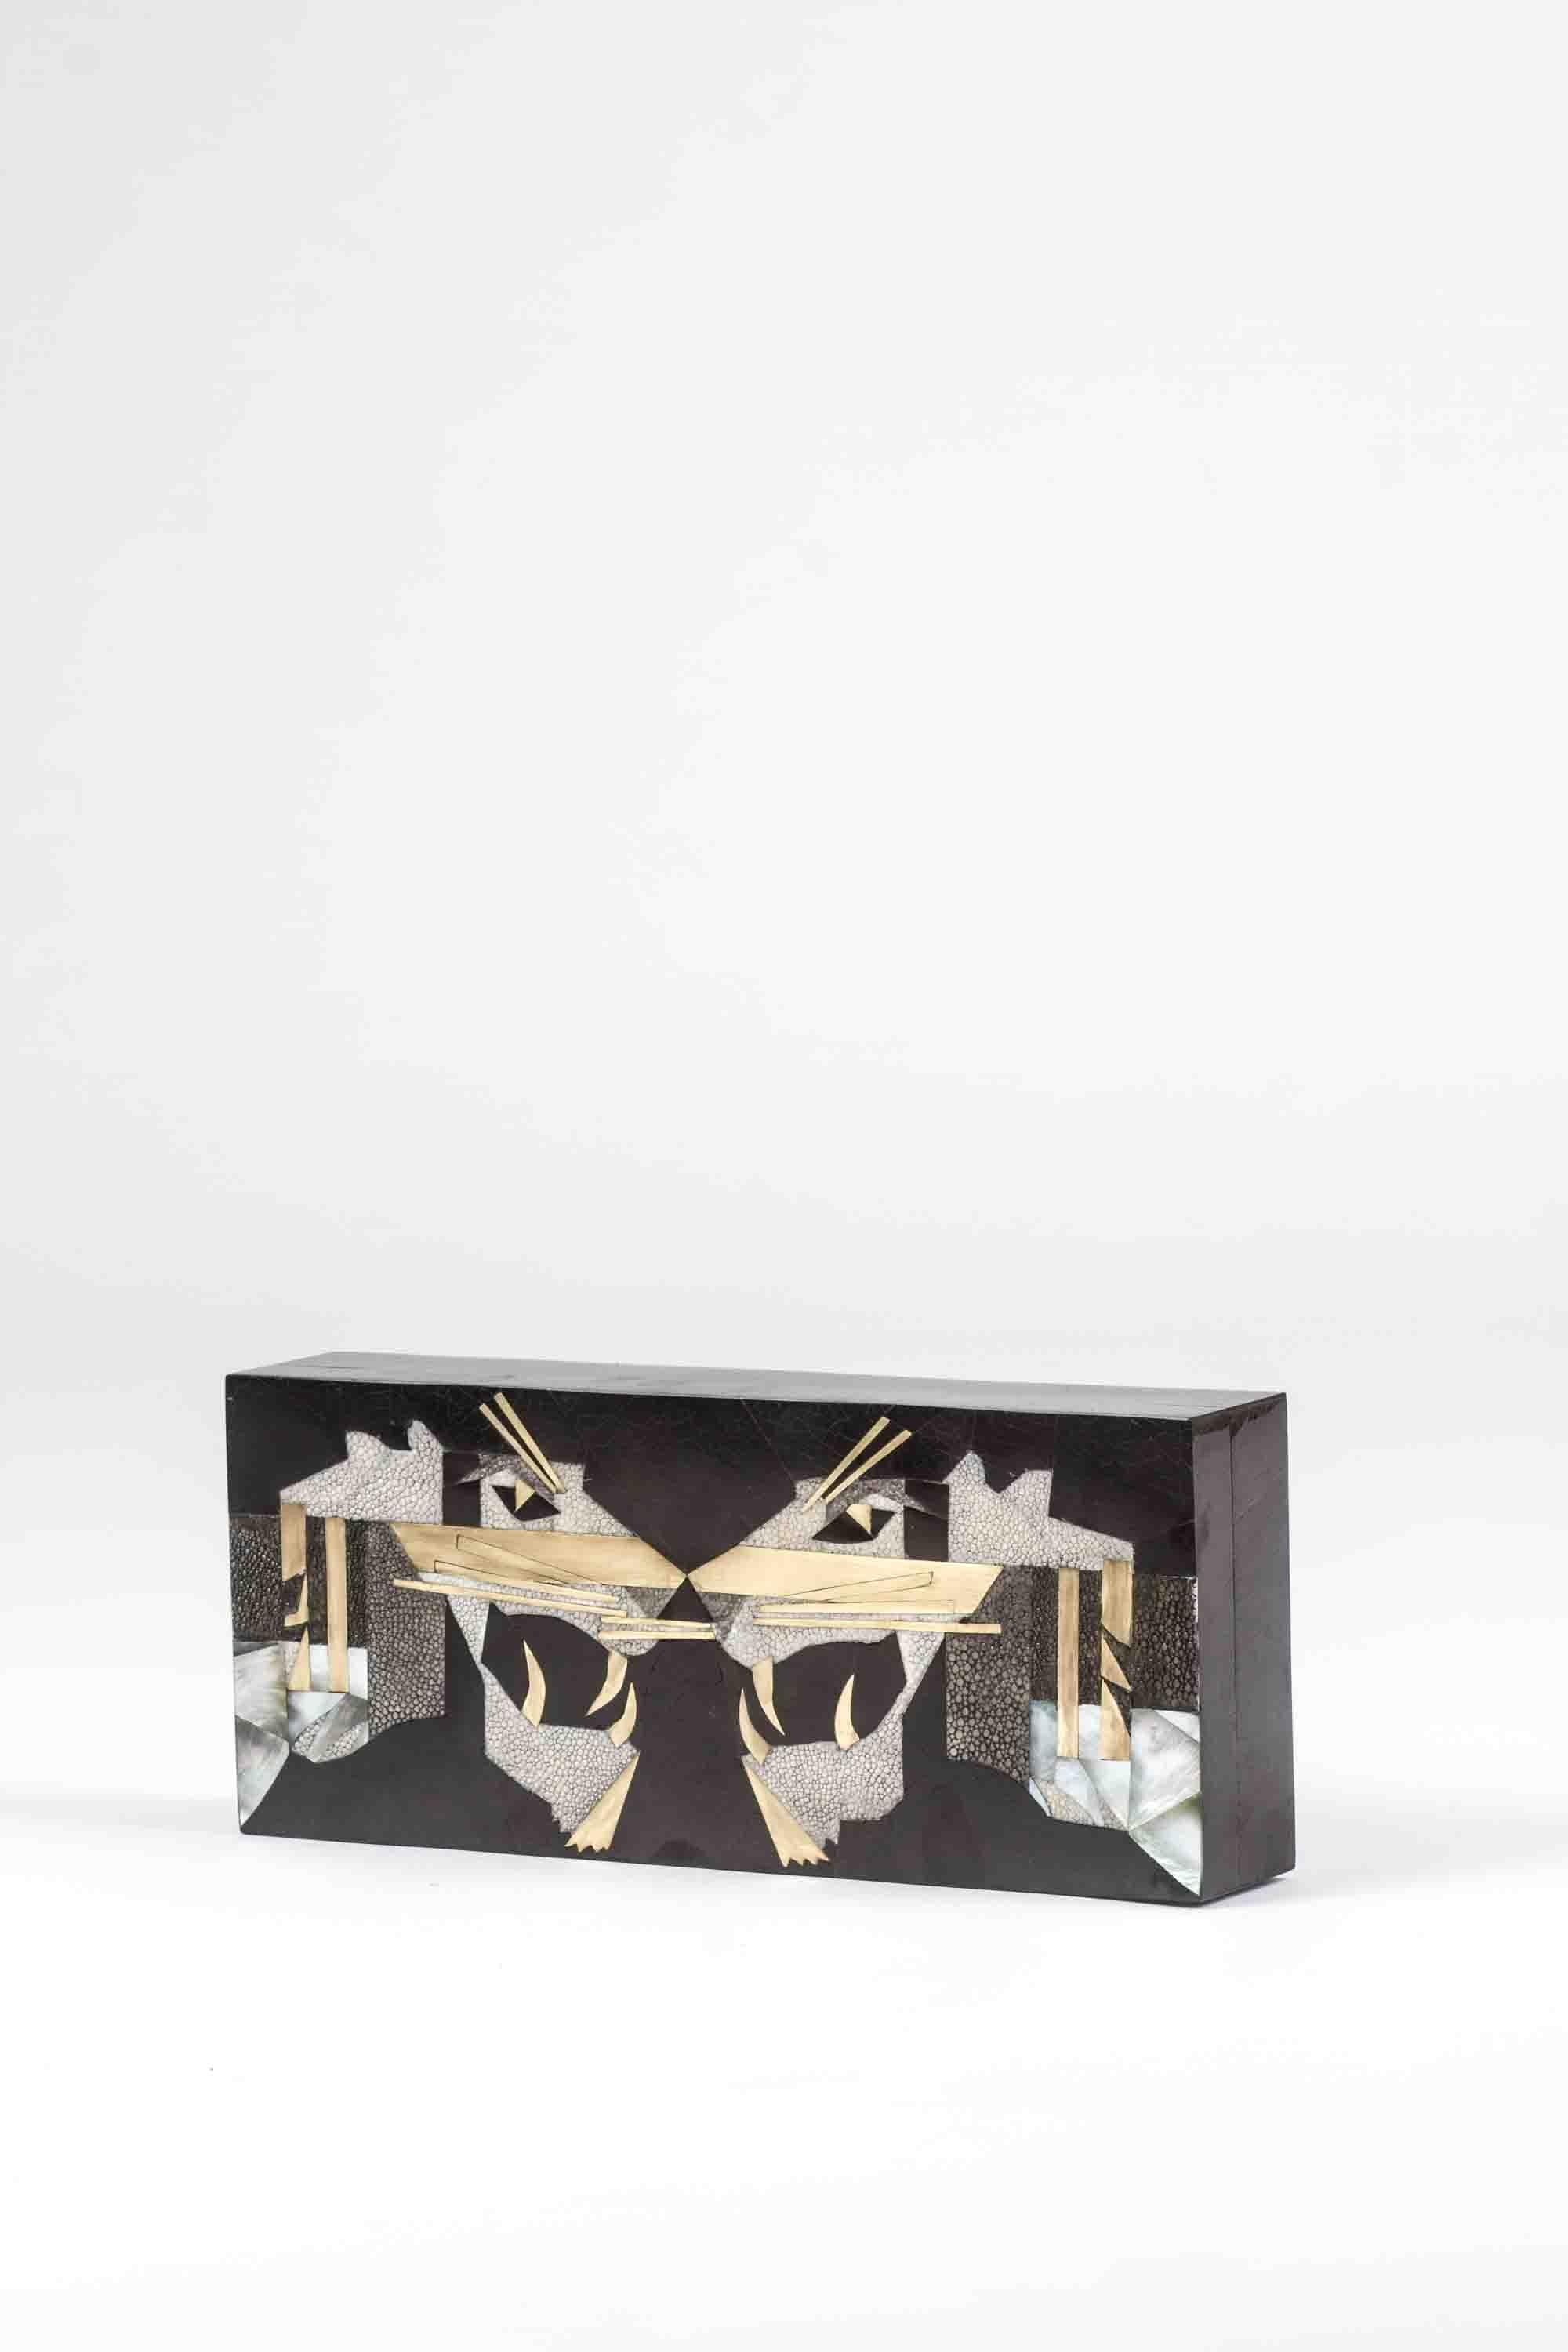 The Panther-themed accessories by Kifu Paris are a fun and bold set of accessories for your home. Inlaid in a mixture of shagreen , pen shell and bronze-patina brass these pieces demonstrate the incredible hand-craftsmanship of KIFU PARIS artisans.